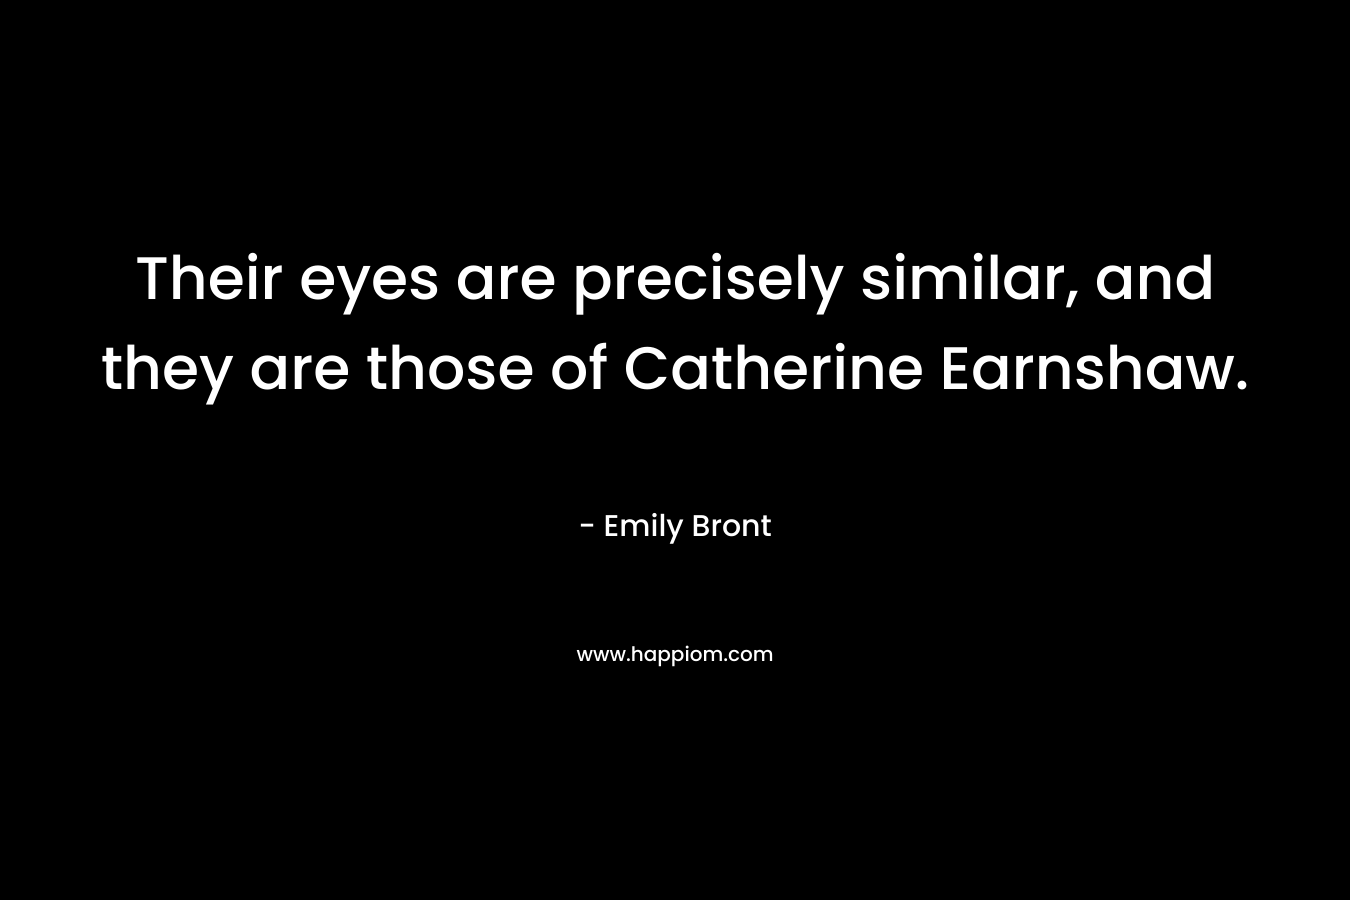 Their eyes are precisely similar, and they are those of Catherine Earnshaw. – Emily Bront